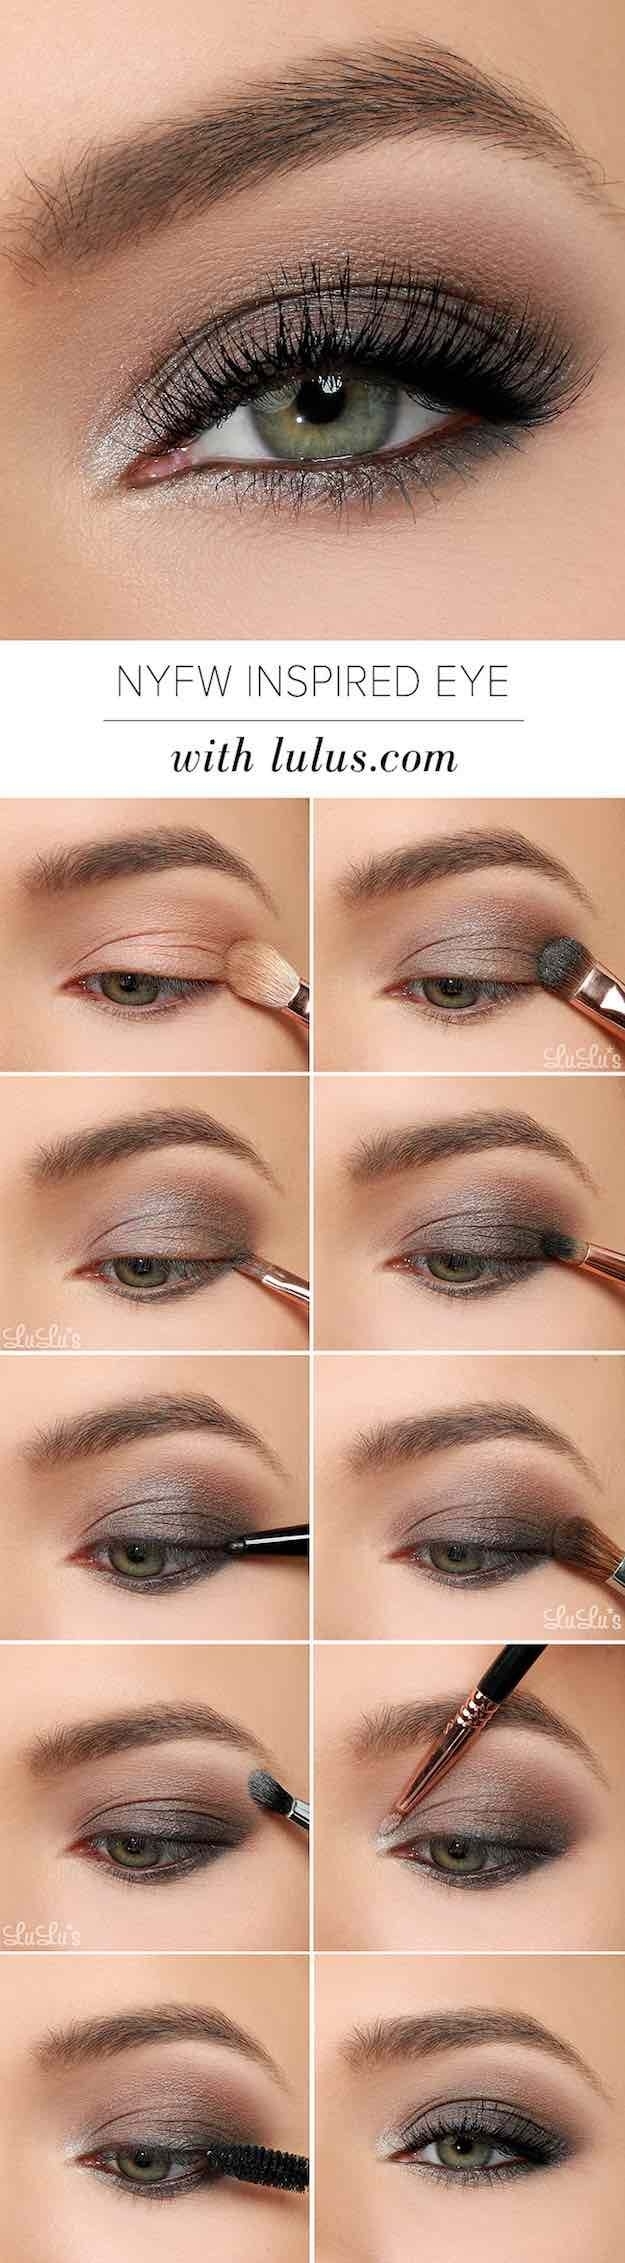 50 Perfect Makeup Tutorials For Green Eyes | Smoky Eye throughout How To Apply Smoky Eye Makeup For Green Eyes